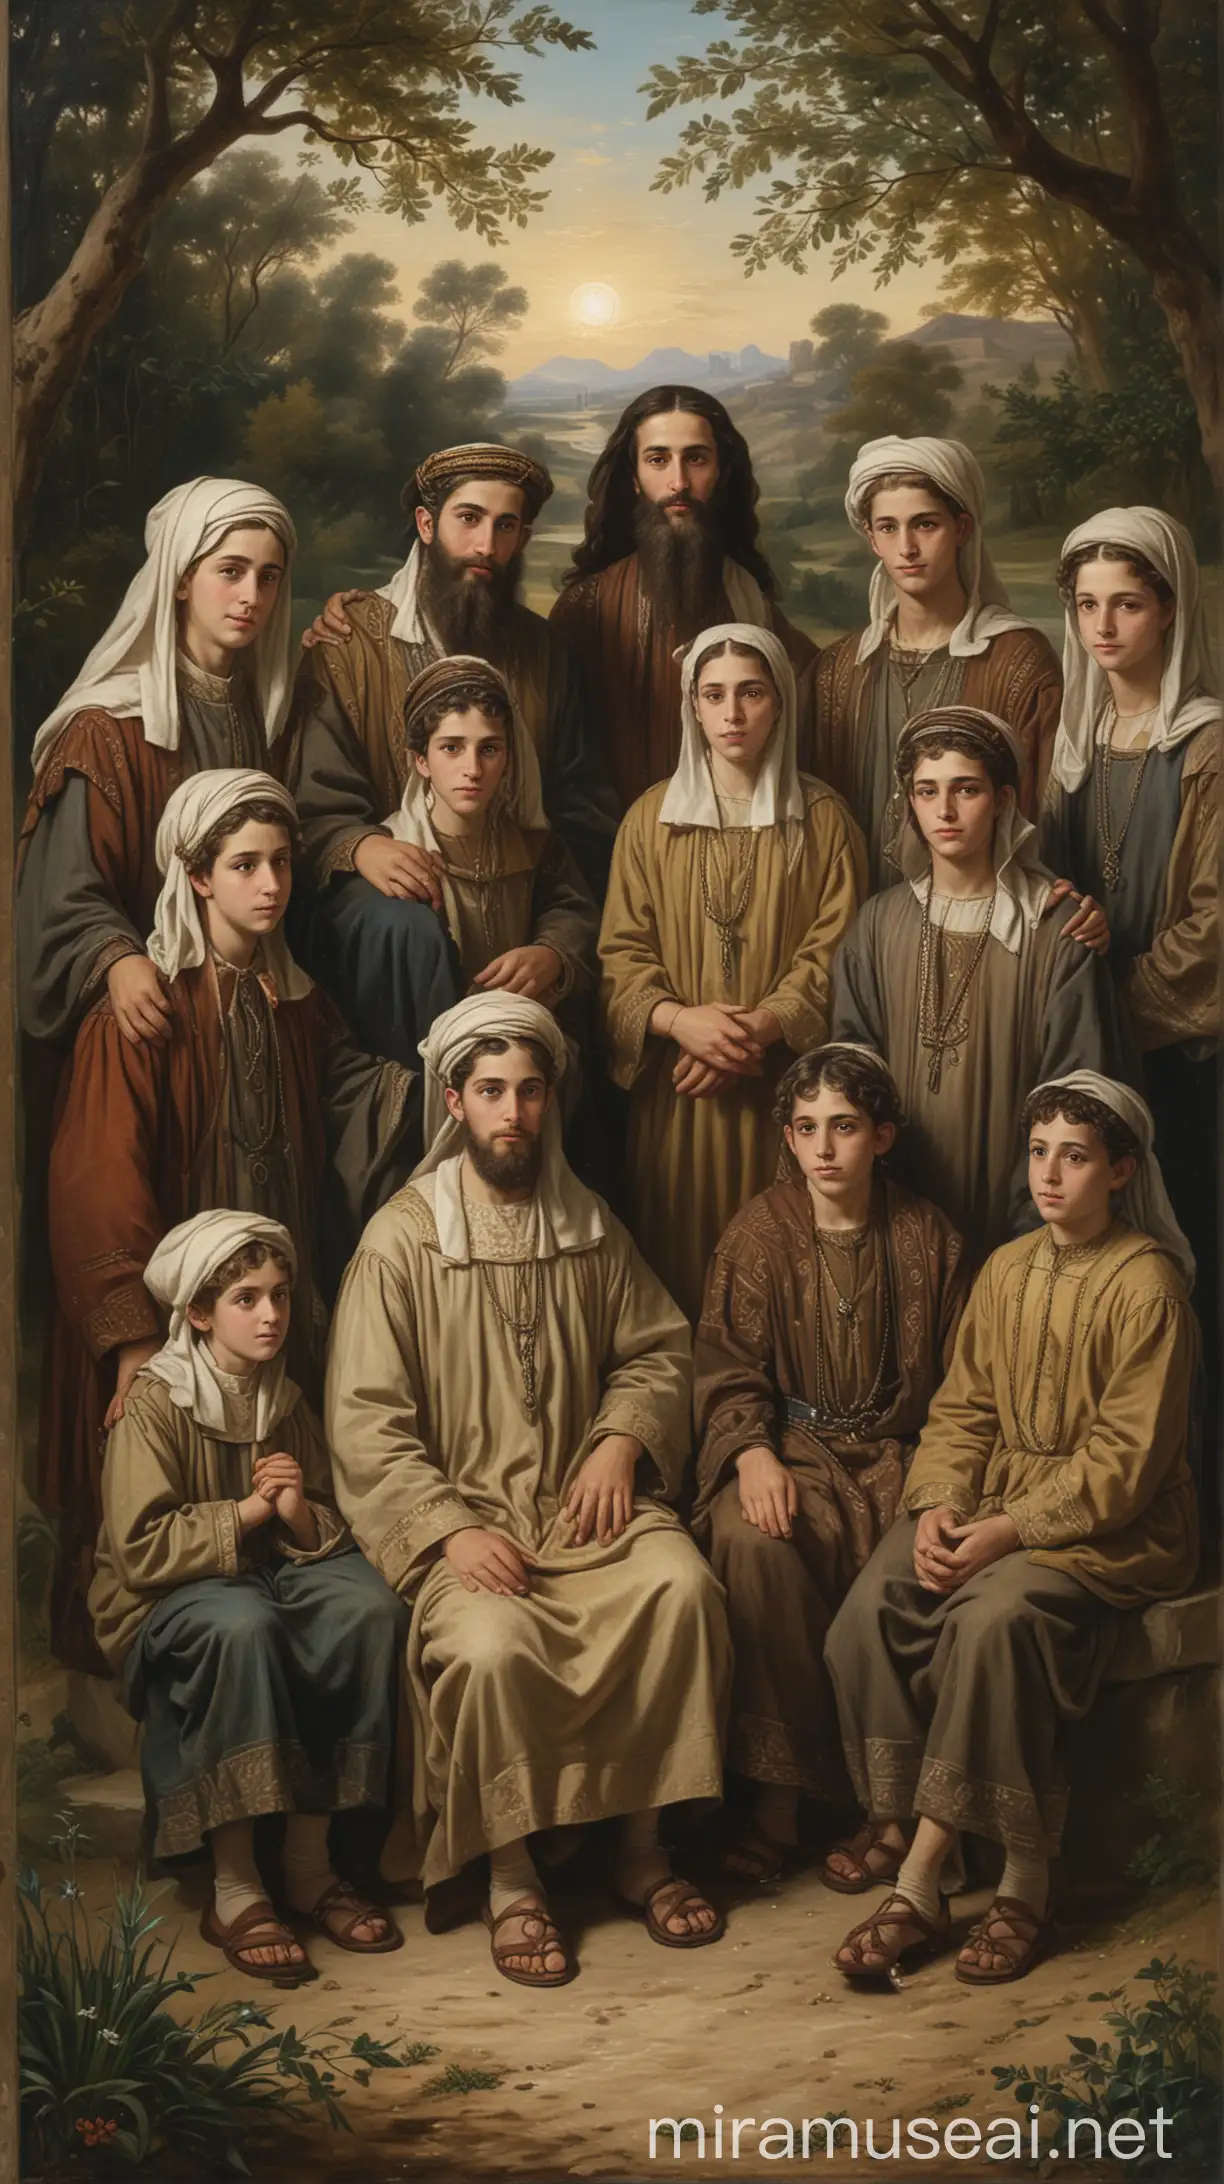 A group portrait showing Buz and his seven siblings—Huz, Kemuel, Chesed, Hazo, Pildash, Jidlaph, and Bethuel. They are depicted in a serene outdoor environment, reflective of an ancient Hebrew family."in ancient world 